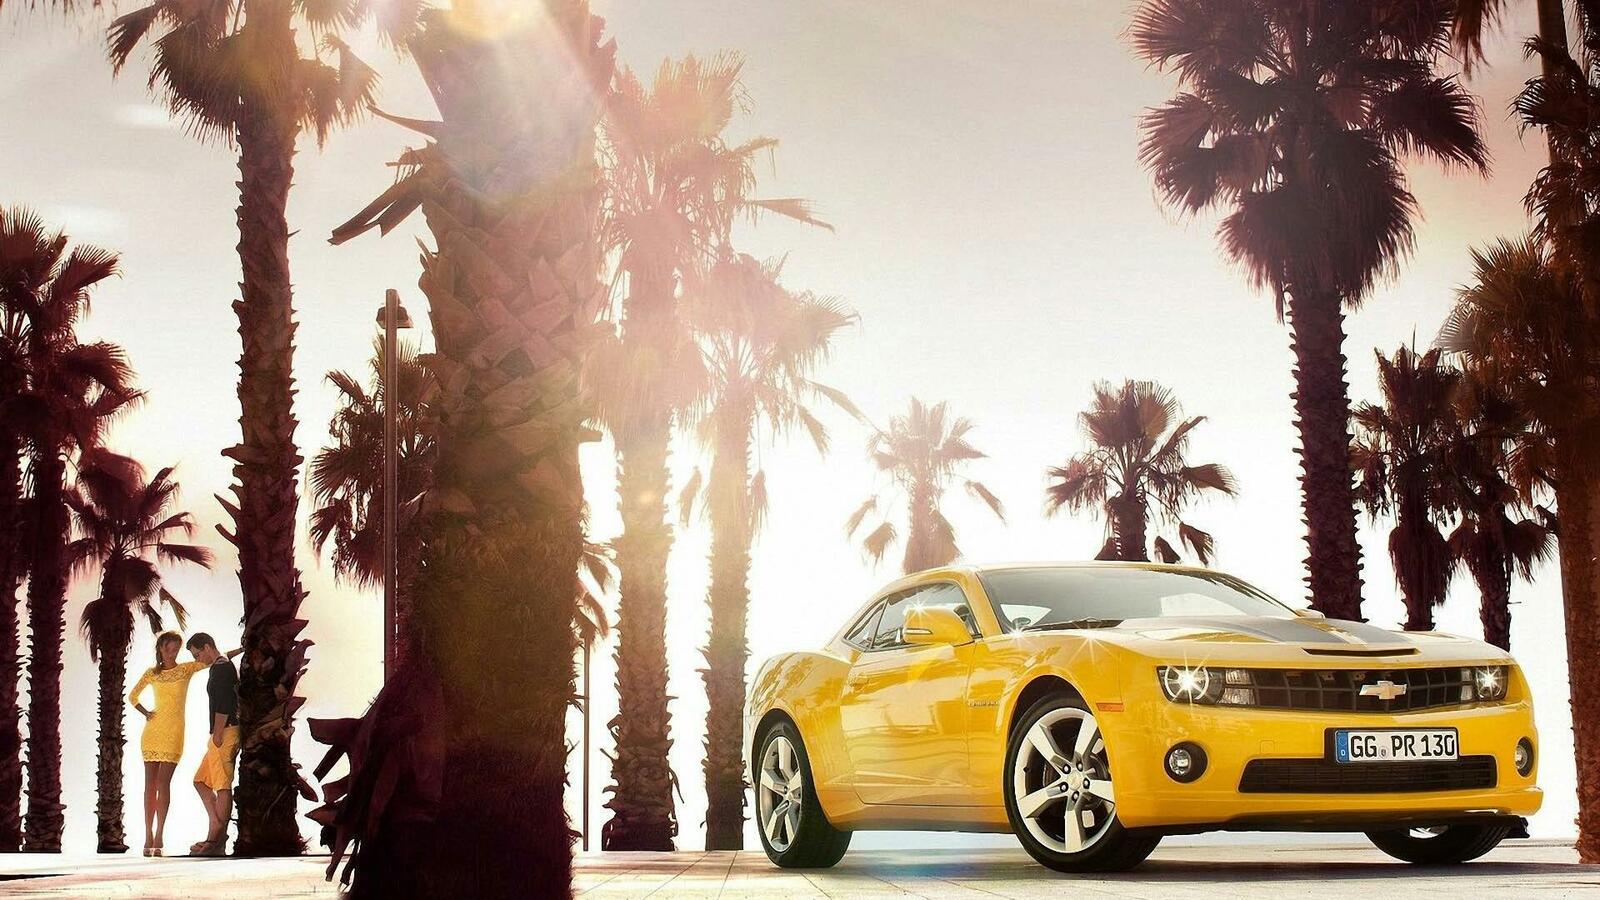 Free photo A yellow Chevrolet Samaro stands under the palm trees.